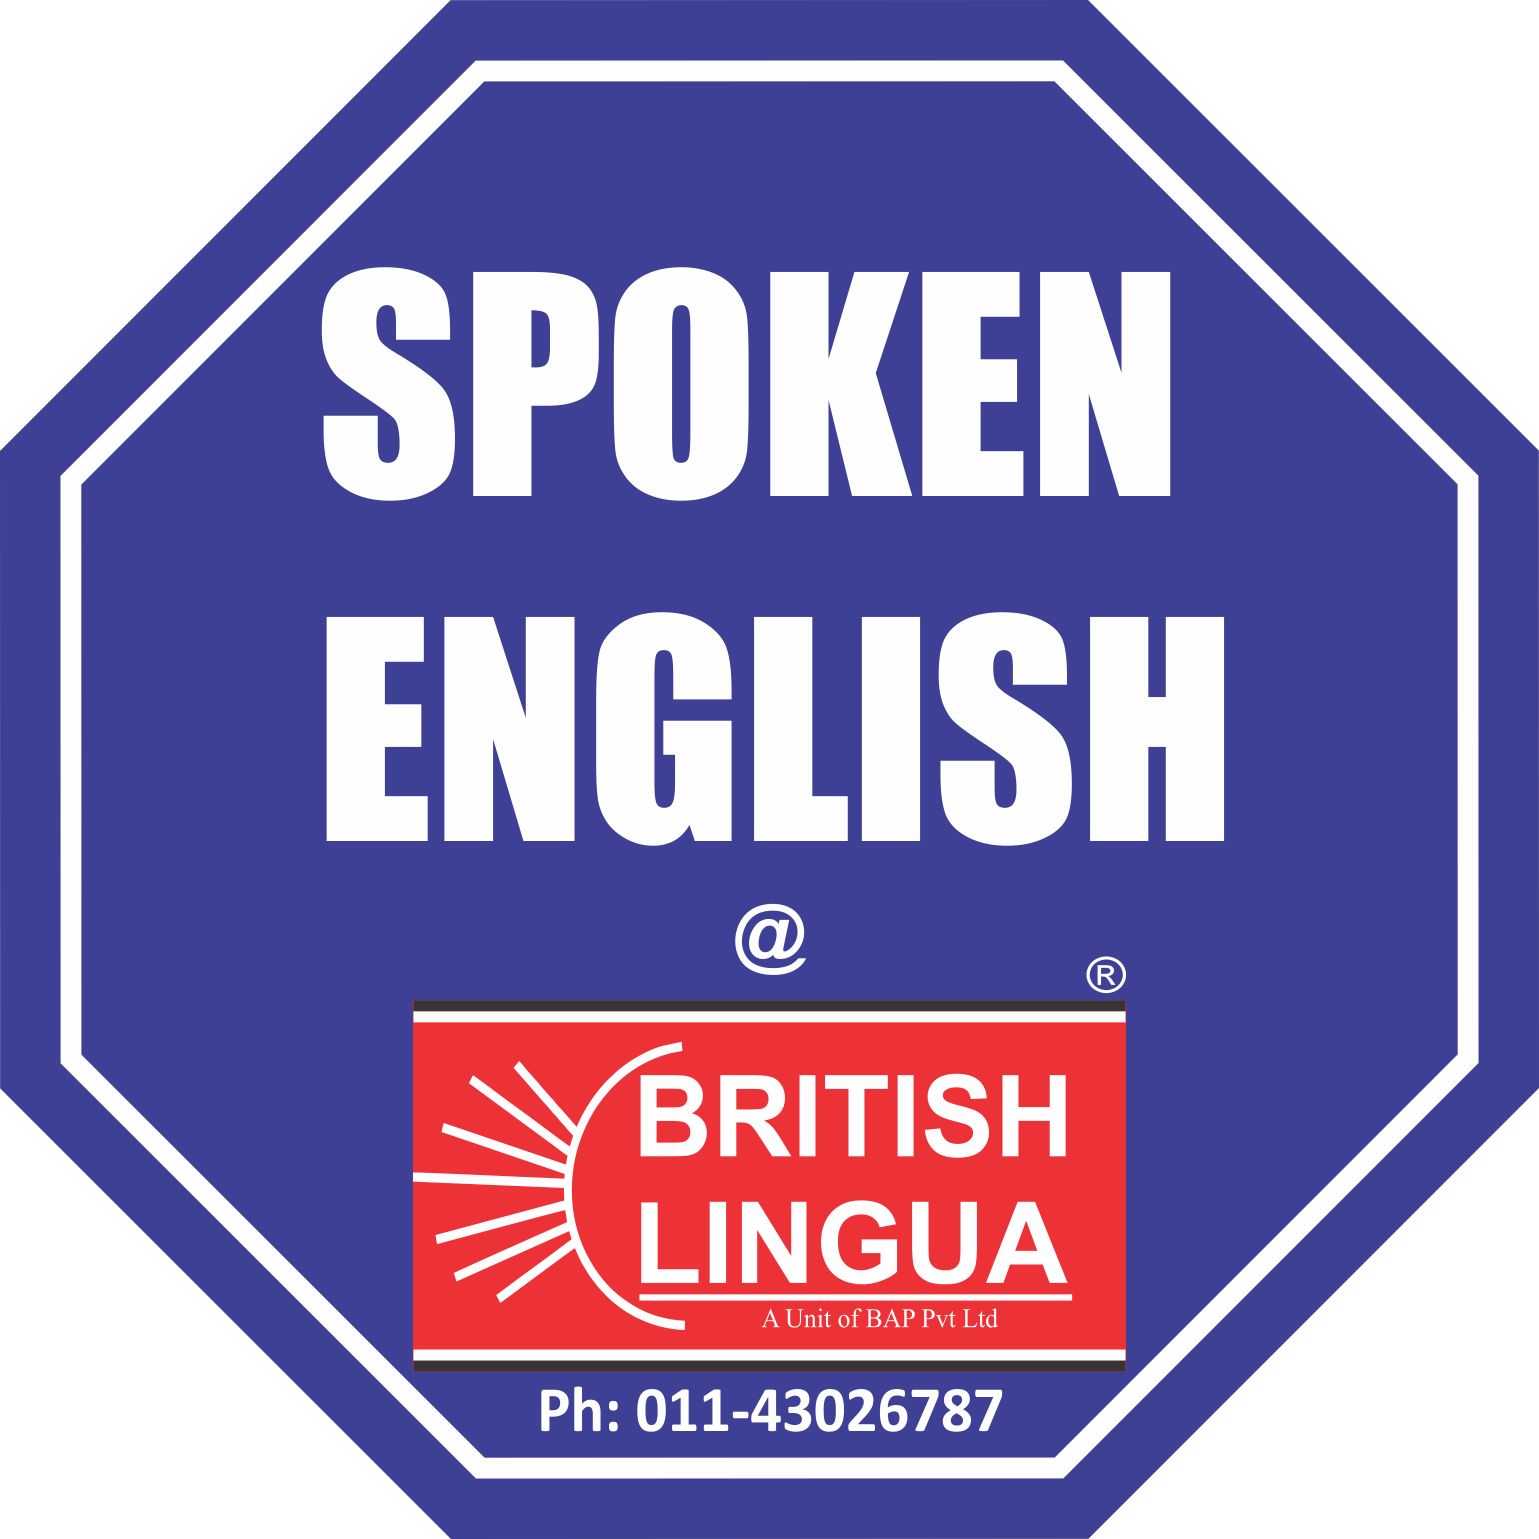 English is spoken all over the. Spoken English. Spoken English classes. Speak English. Spoken English фото.